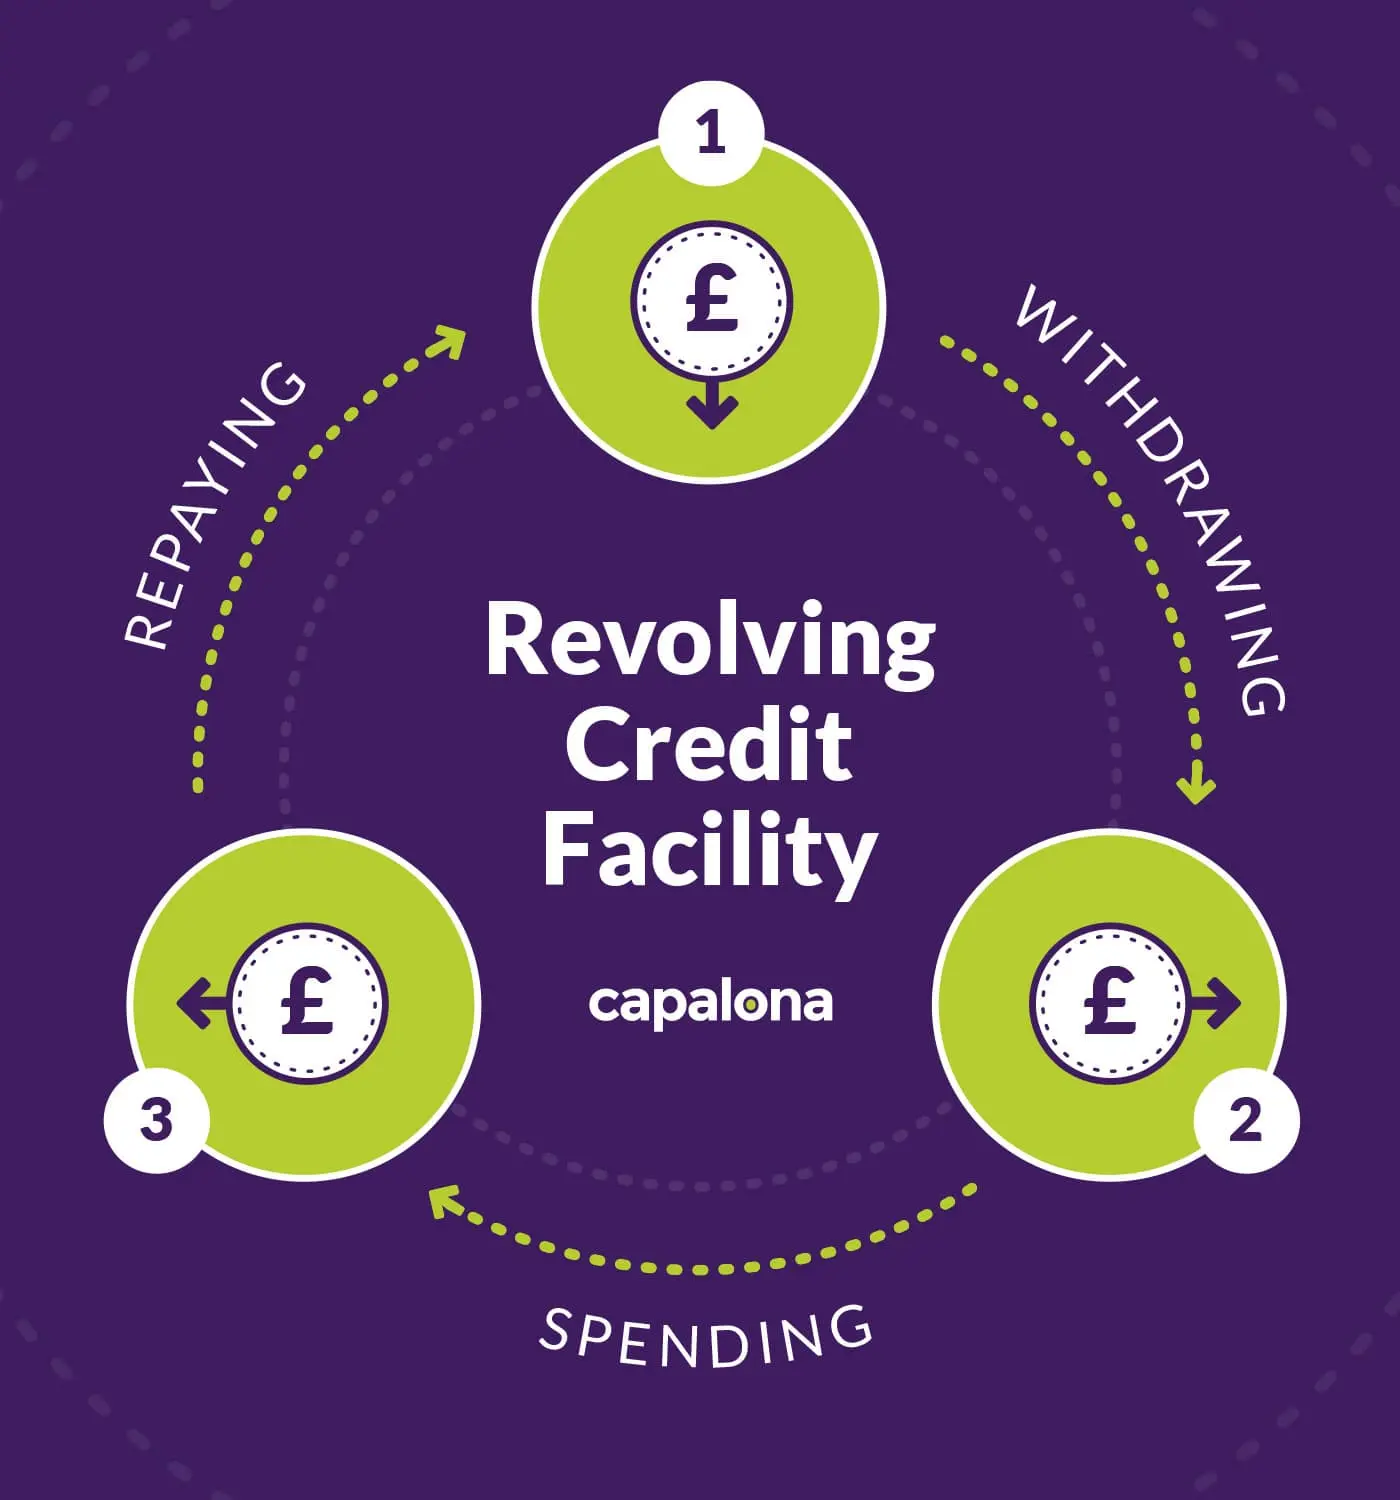 How a revolving credit facility (RCF) works